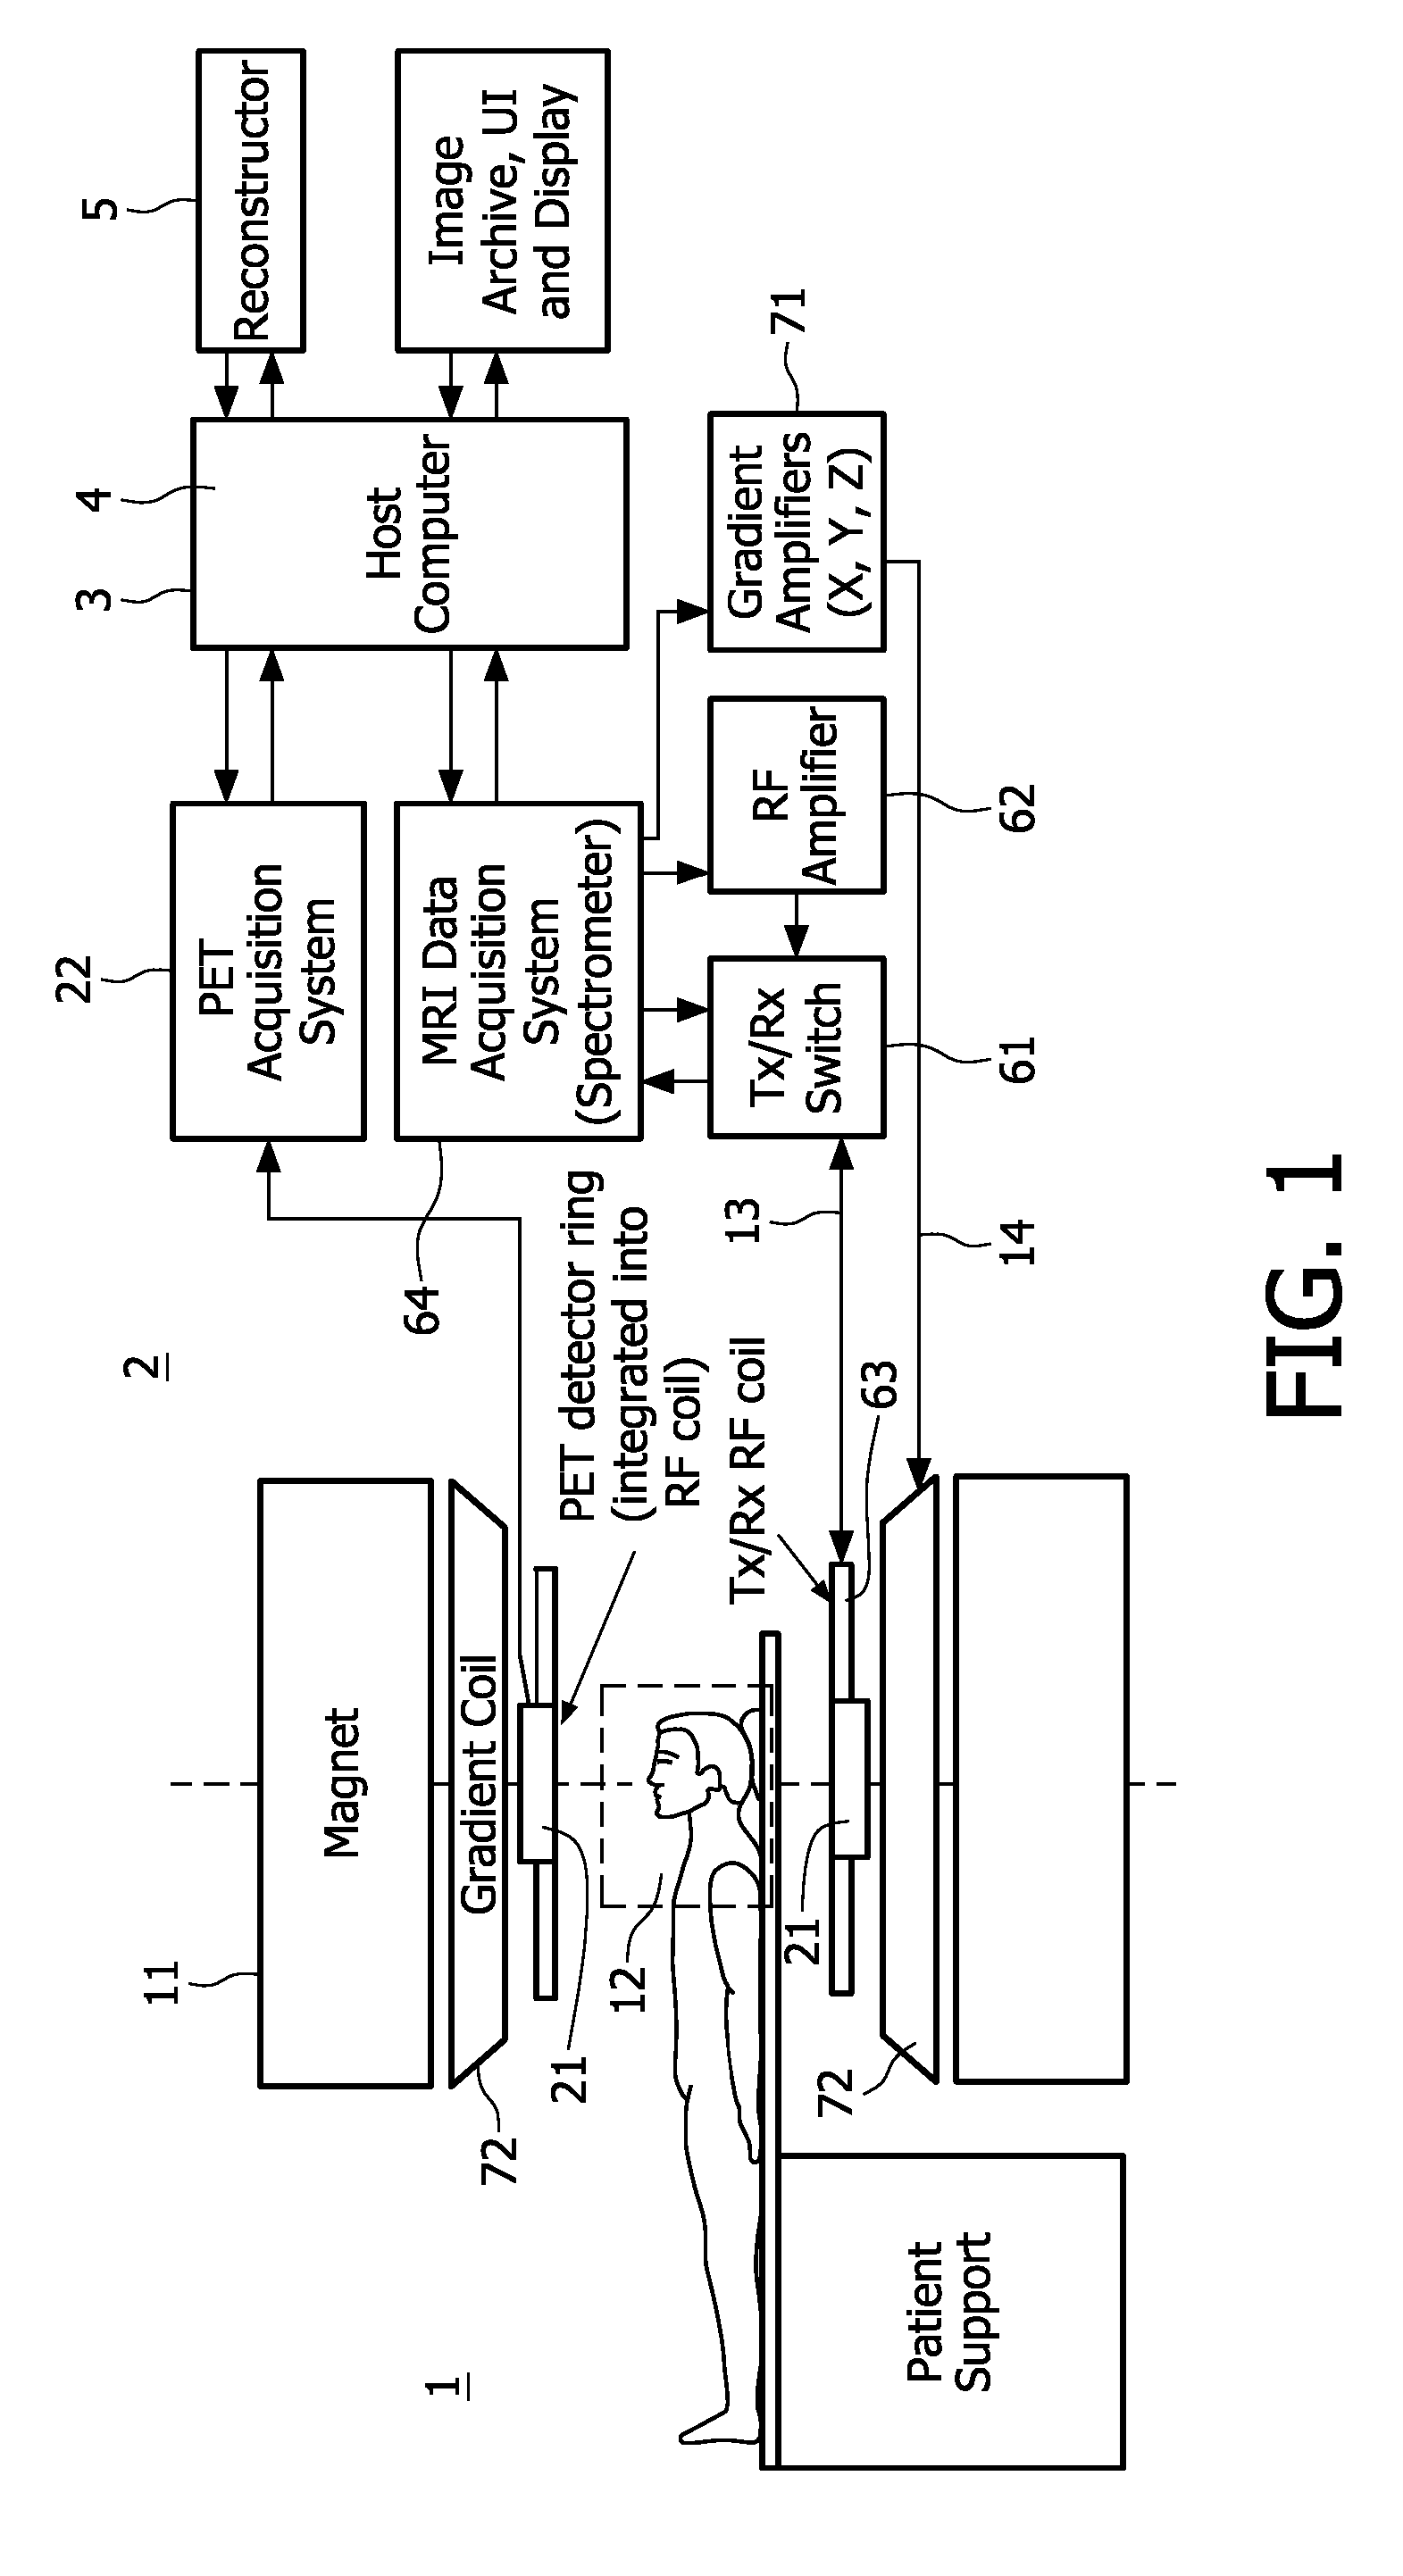 Motion correction in a pet/mri hybrid imaging system